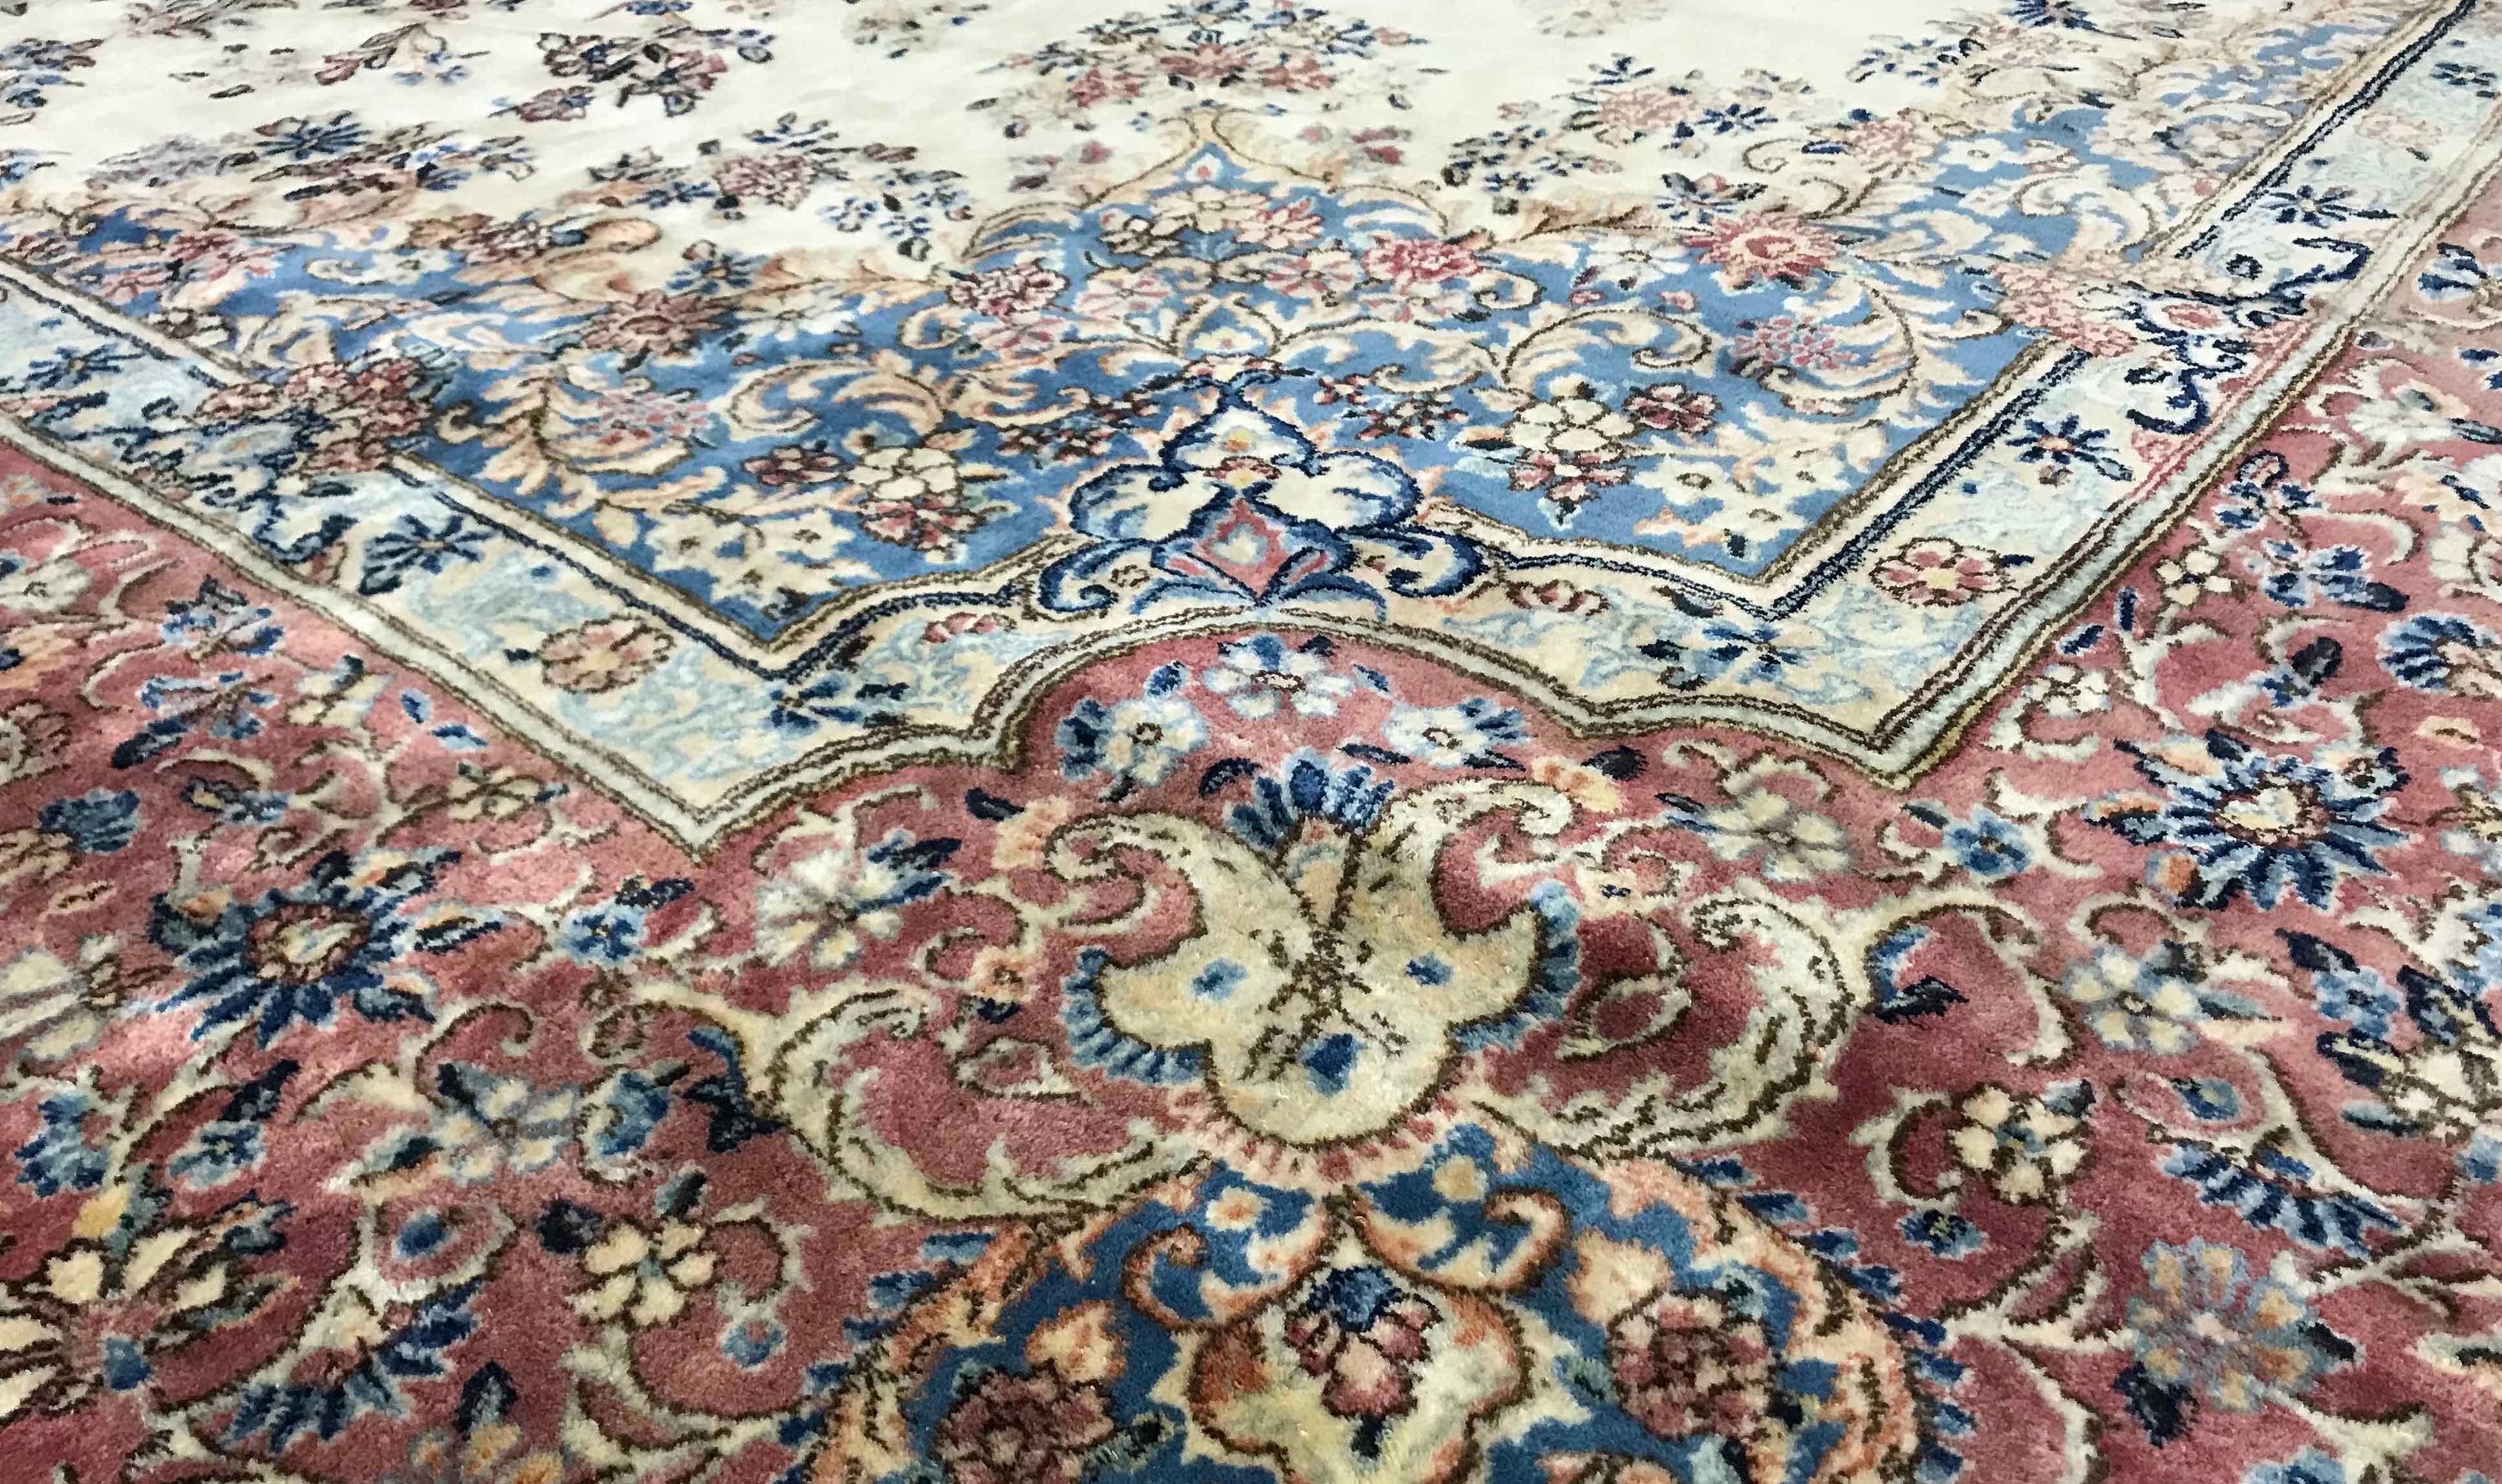 Oversize vintage Persian Kerman rug circa 1940. A palace size Kerman rug with the field overflowing with floral elements in a wide variety of colors and shades all centered on a small medallion with the border continuing the meticulously detailed